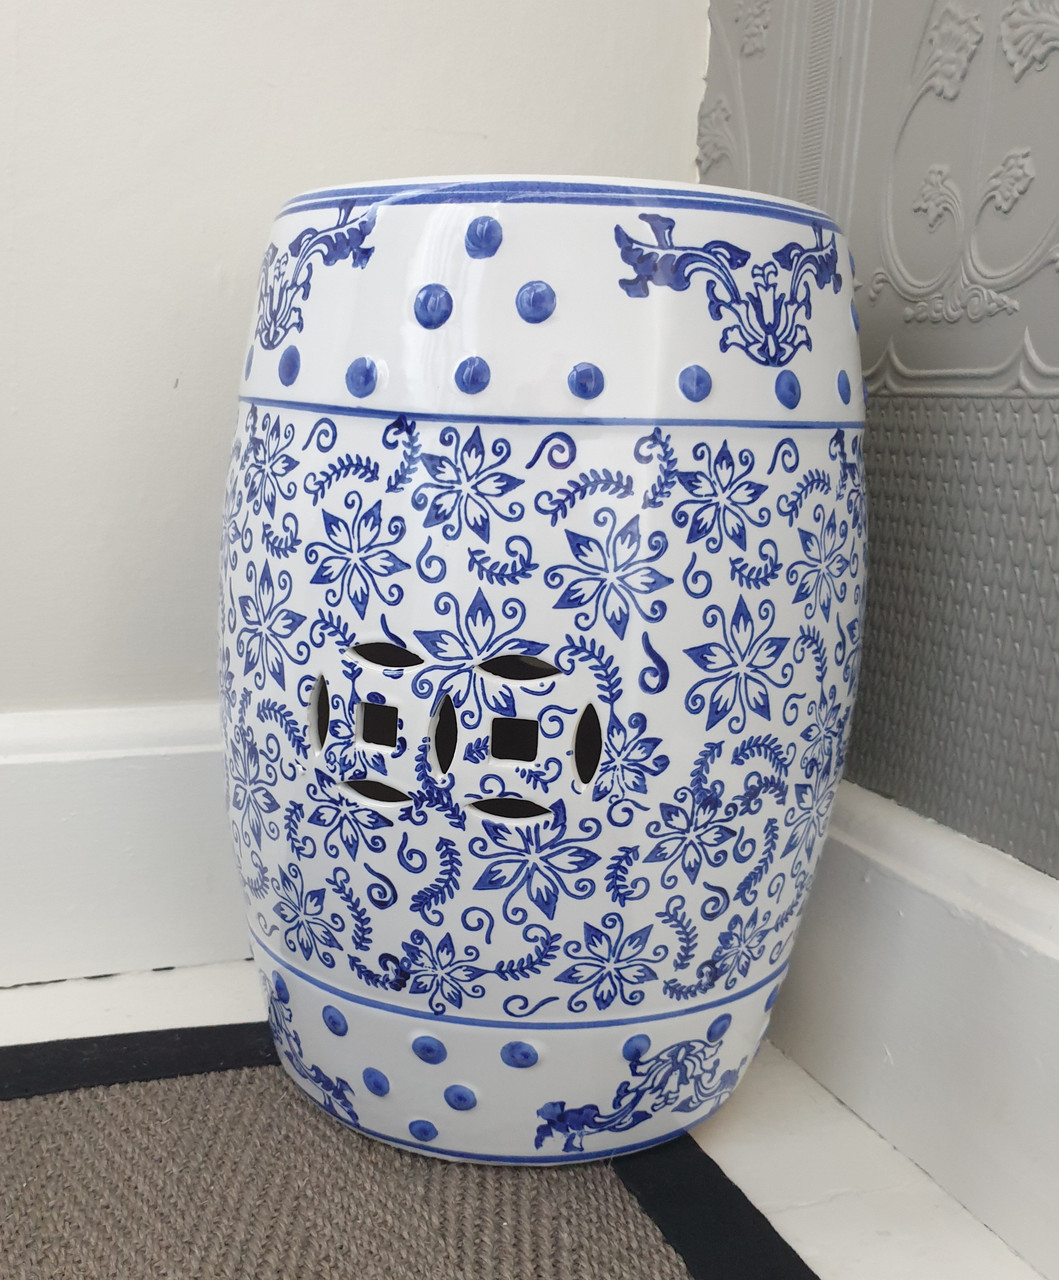 Chinese Ceramic  Garden Stool / Plant Stand - Blossom and Catkins Pattern